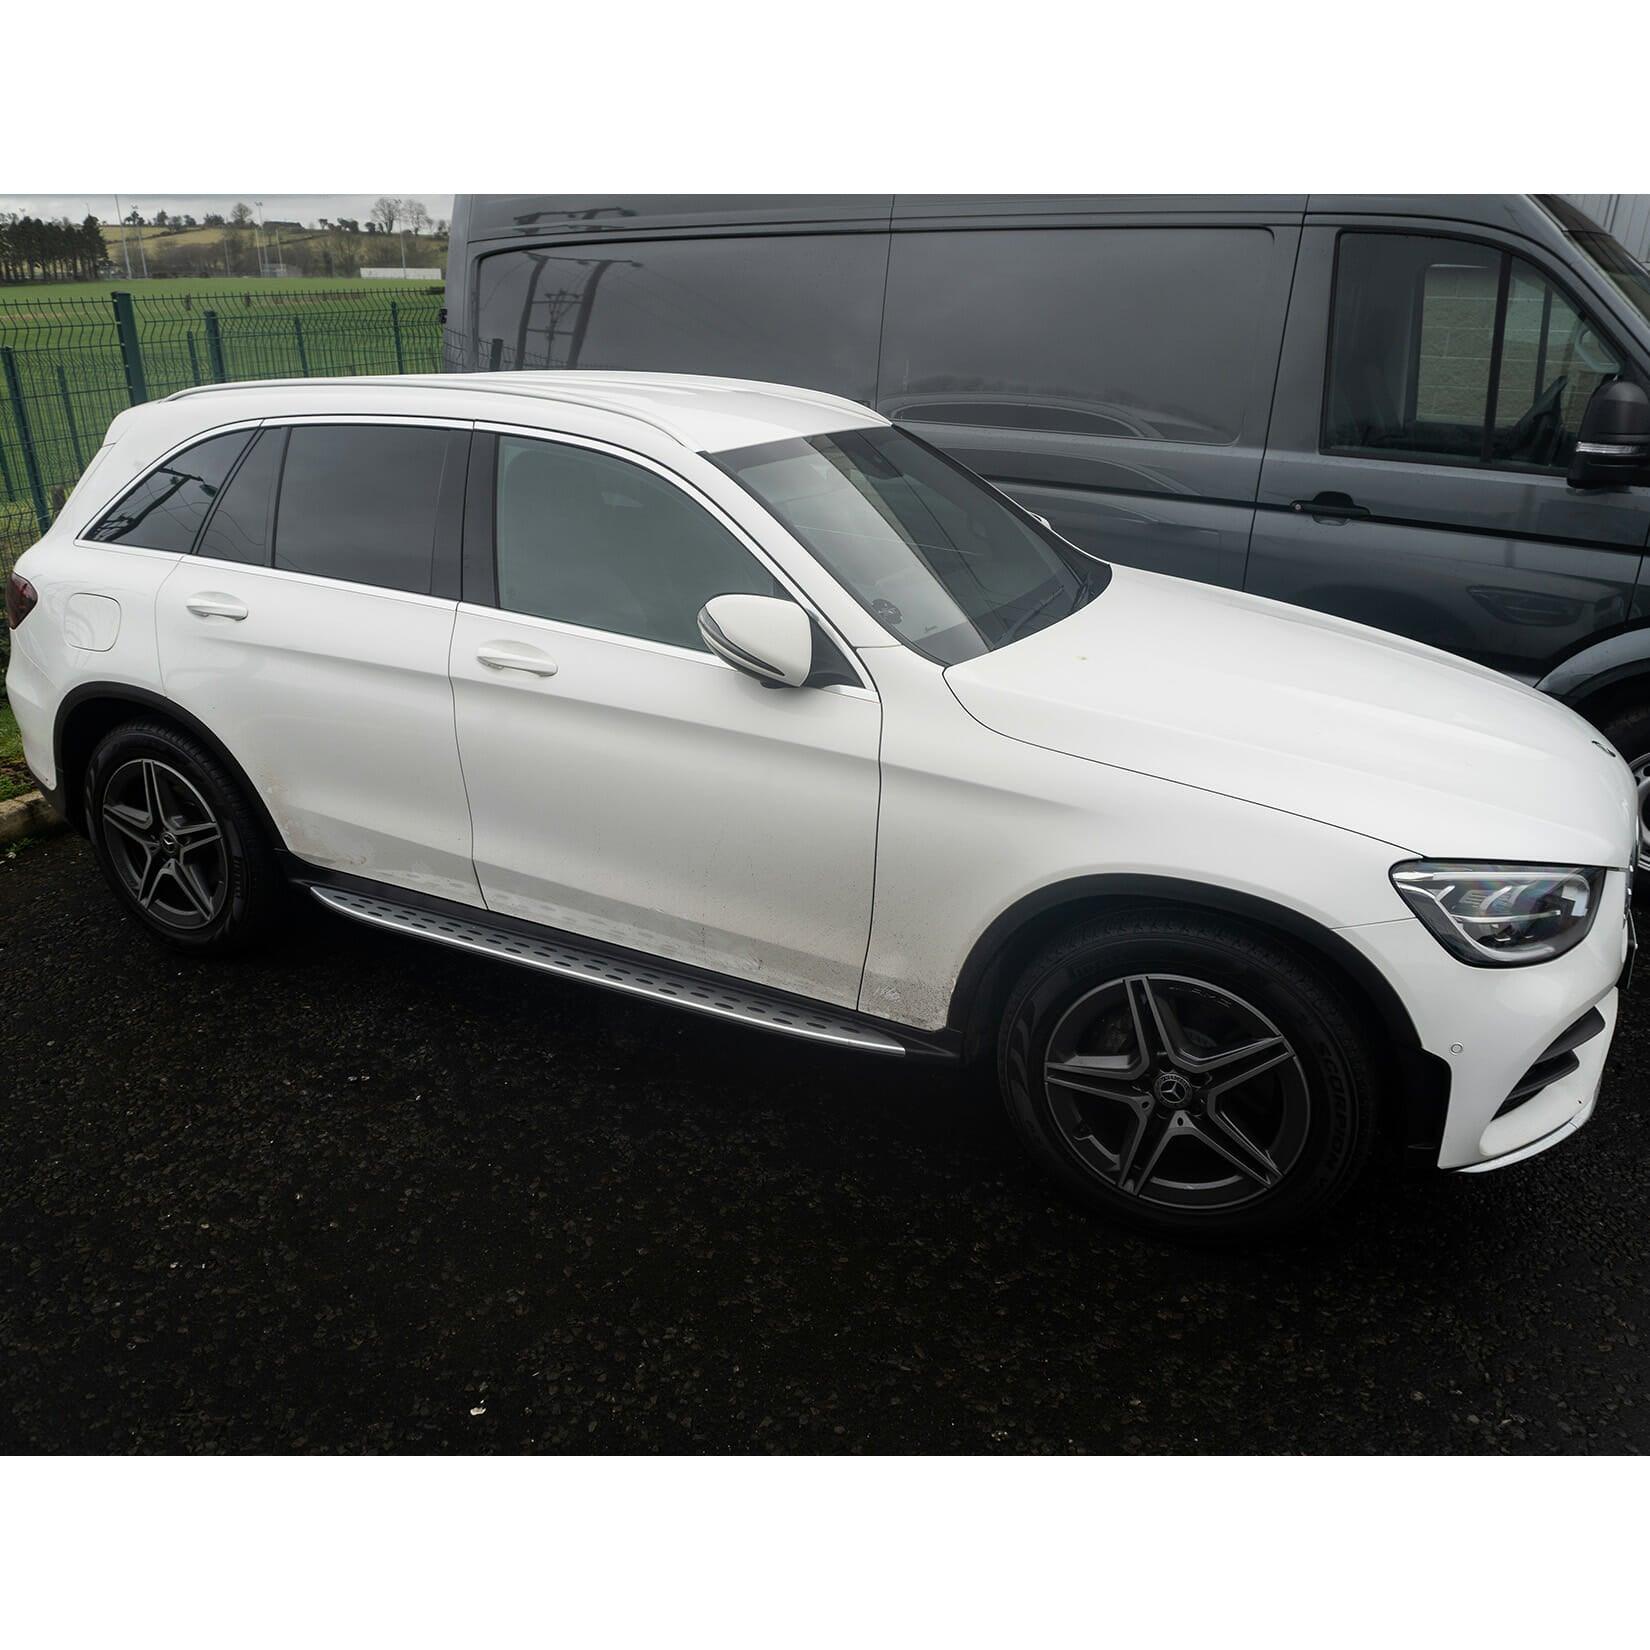 MERCEDES GLC X253 2015 ON - OE STYLE INTEGRATED SIDE STEPS - RUNNING BOARDS - Storm Xccessories2